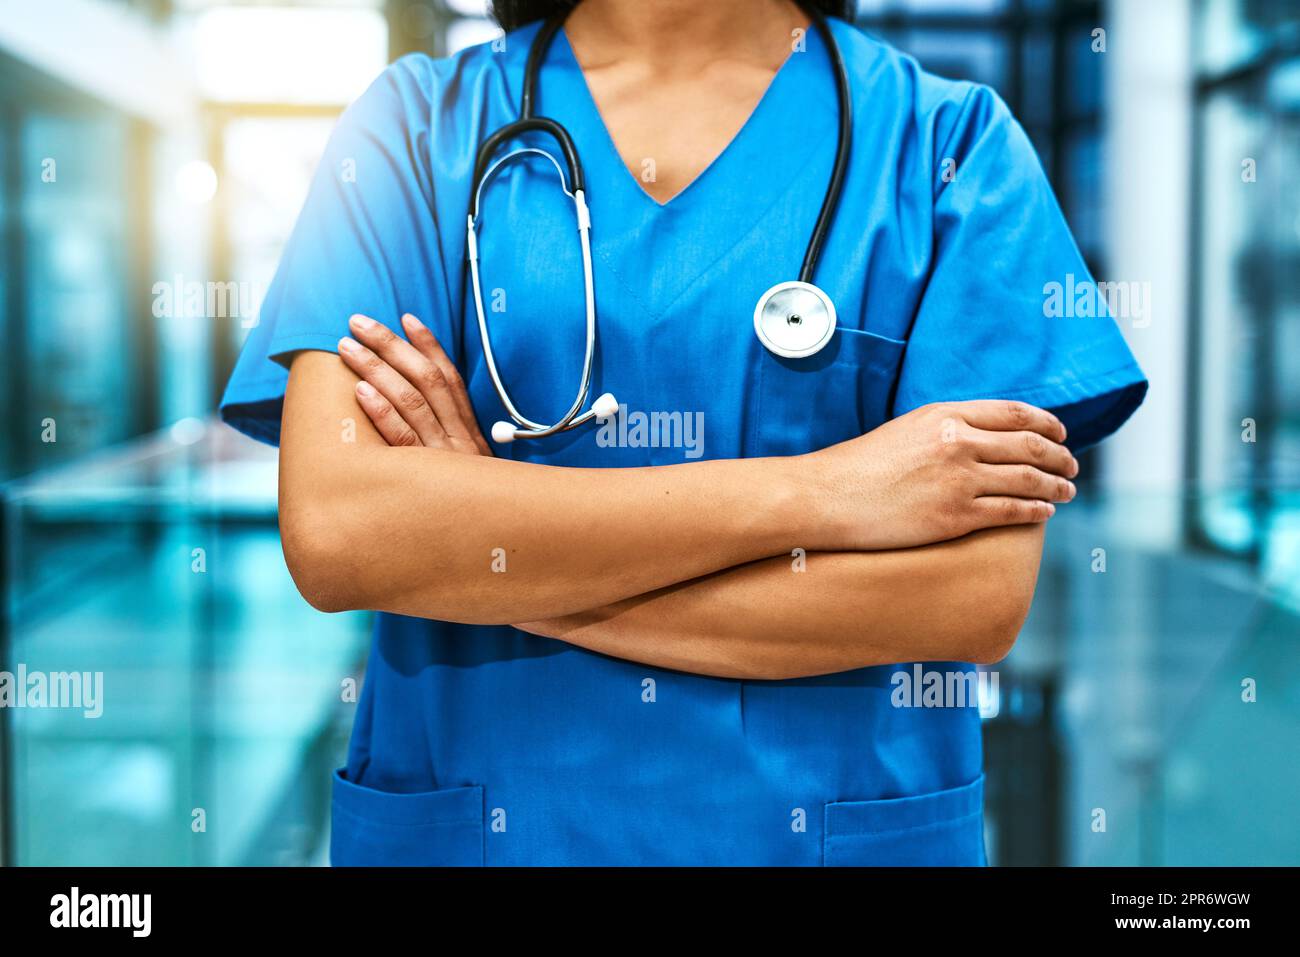 These hands will take care of you. Shot of an unrecognisable nurse standing in a hospital. Stock Photo